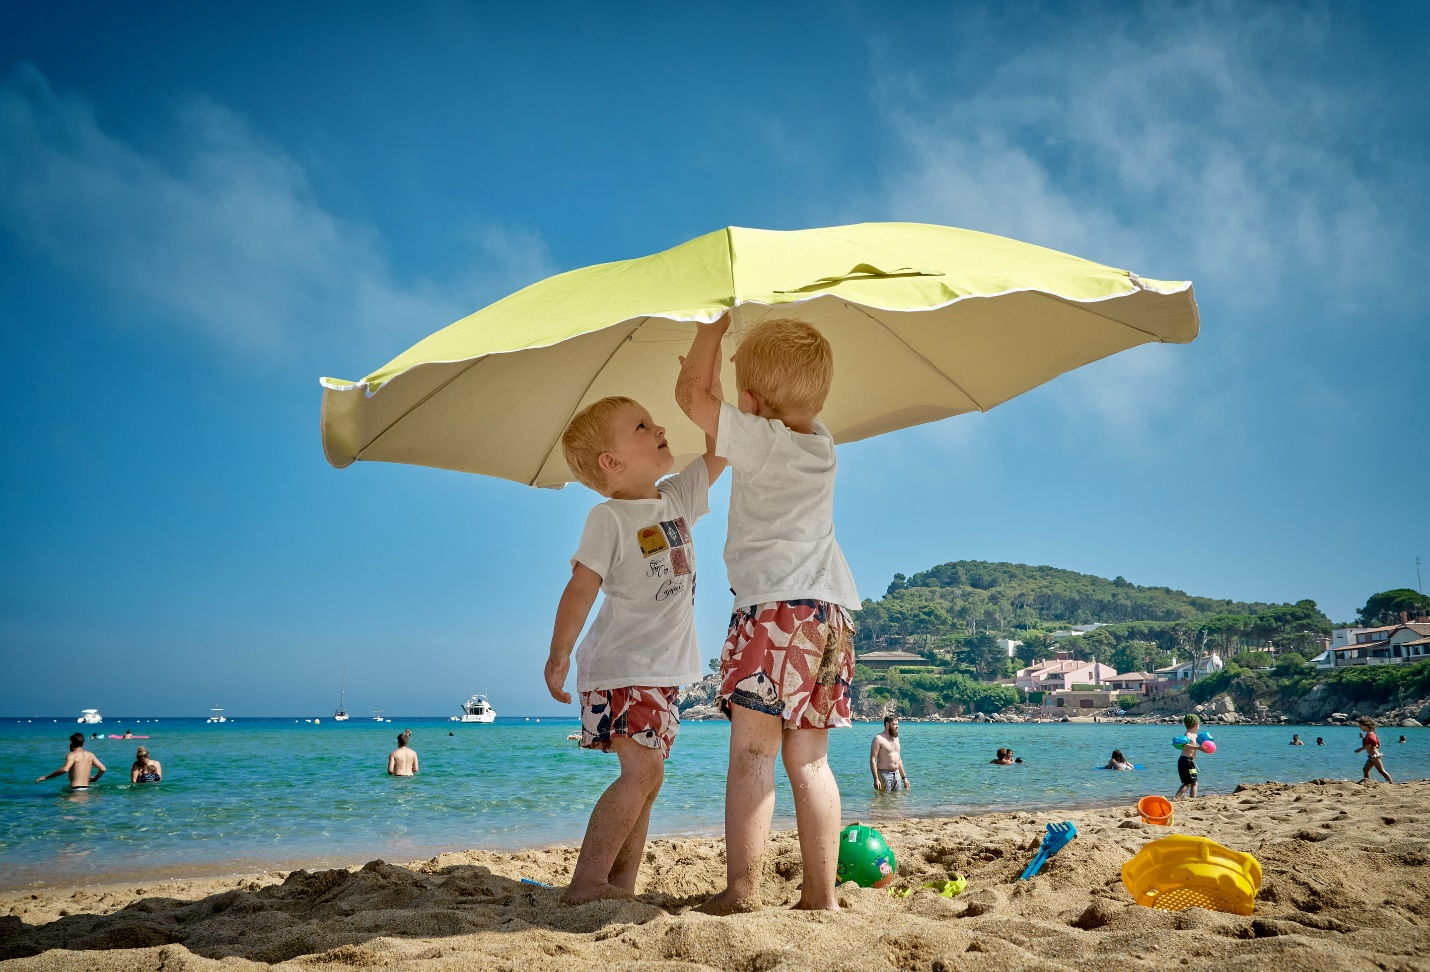 While planning a vacation, keep in mind that the destination should be kid-friendly. Here’s a list of 8 most kid-friendly places you can plan your vacation at. Keep reading to find out.